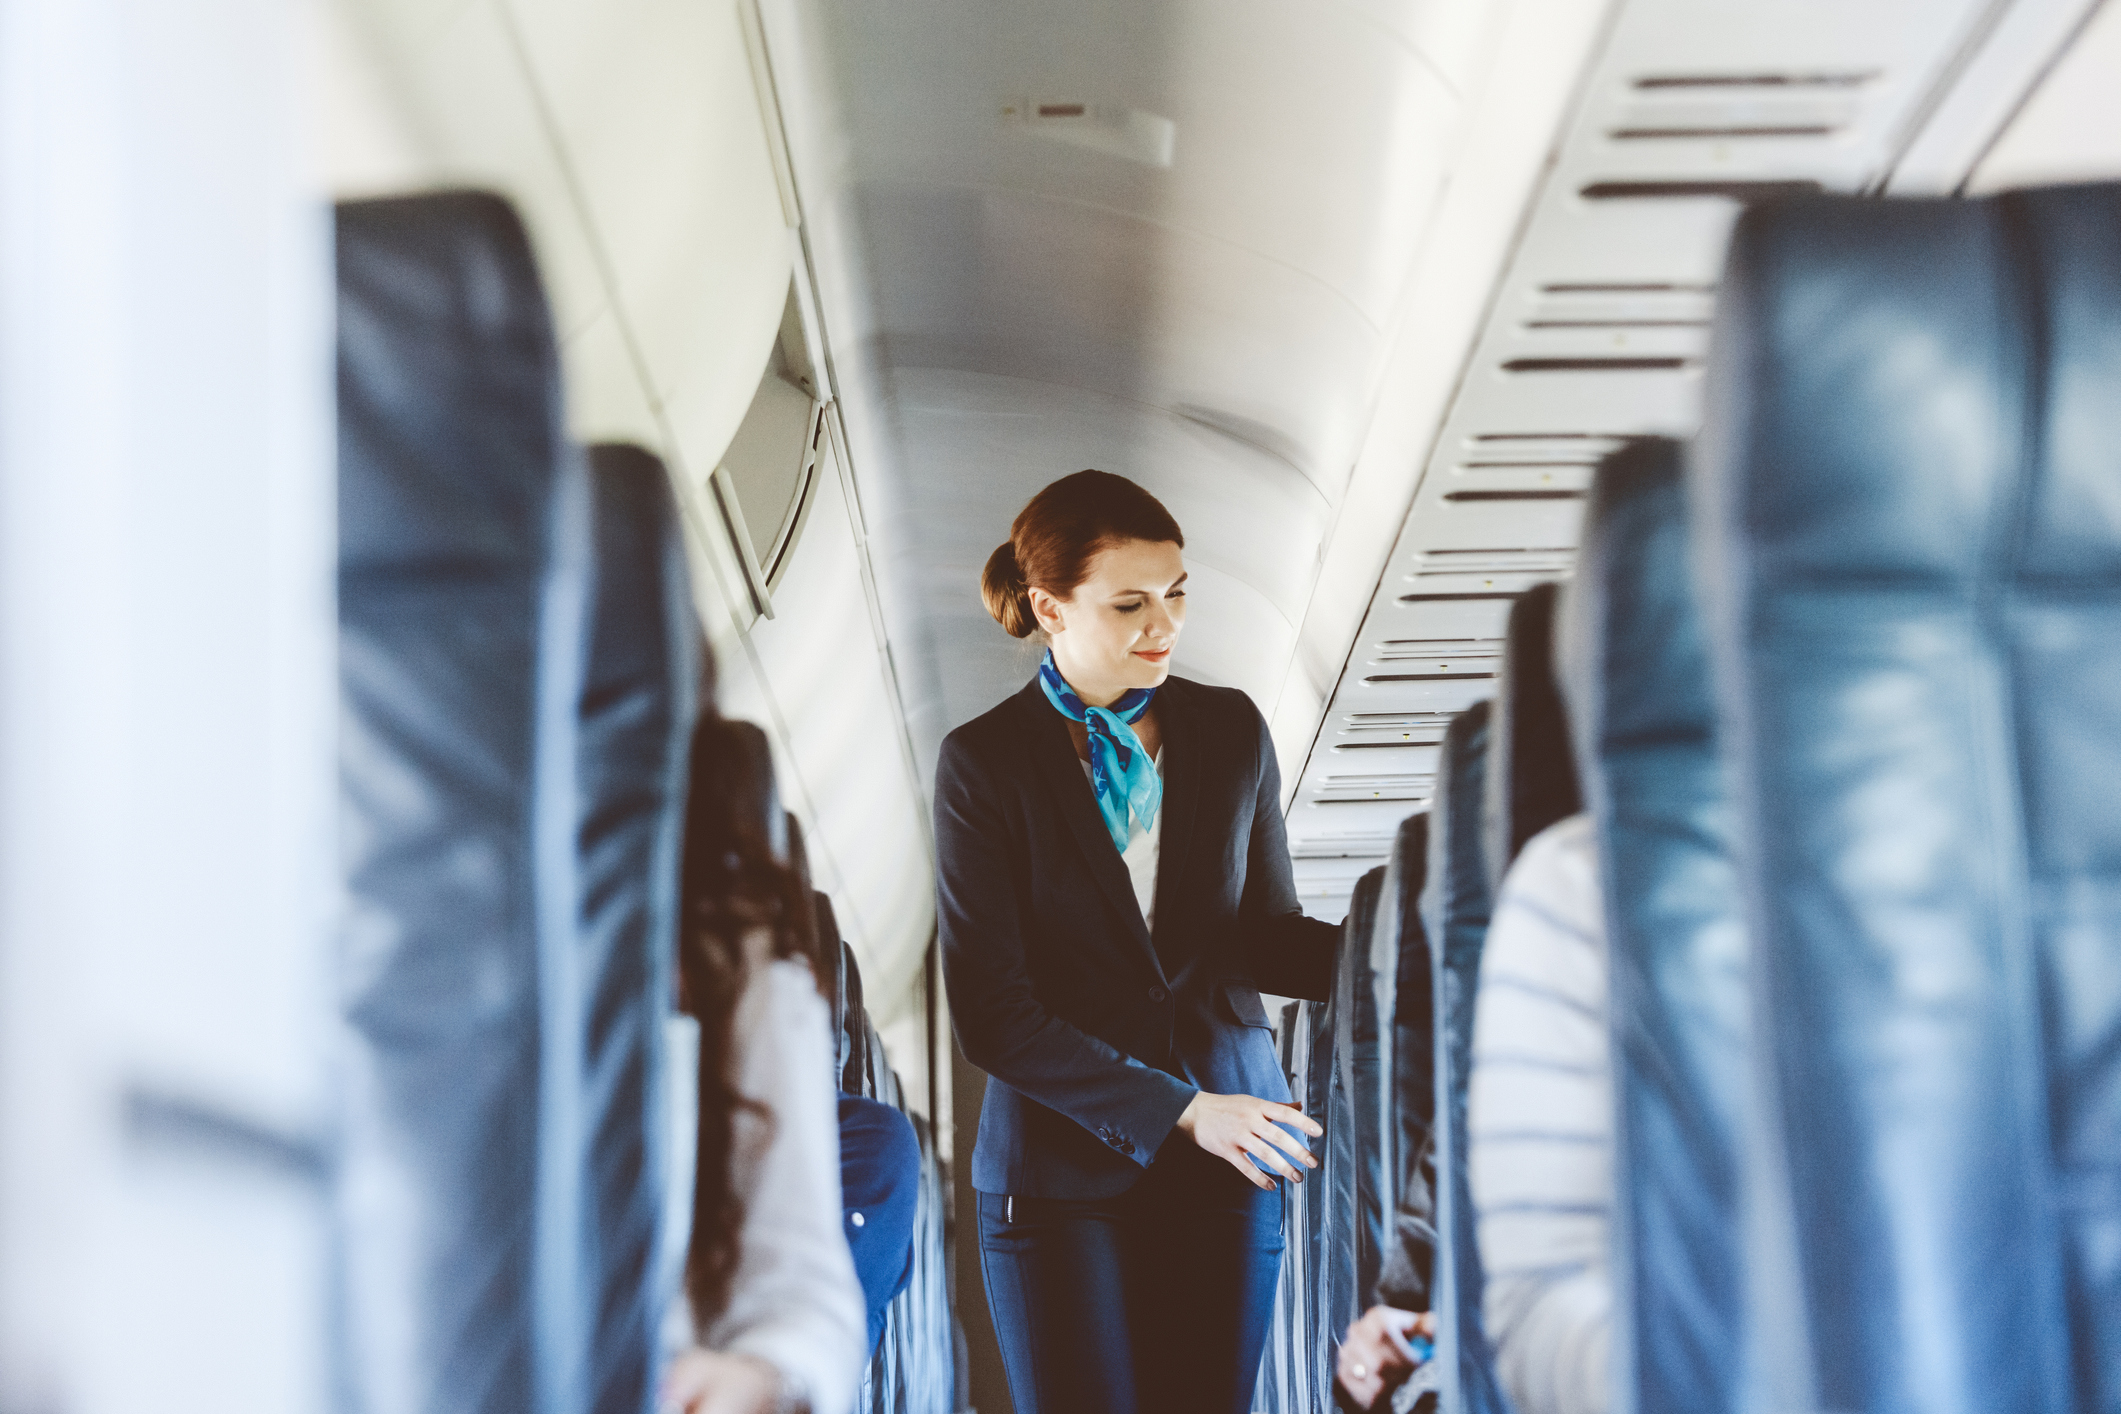 Flight attendant walking down the aisle of an airplane, checking on passengers